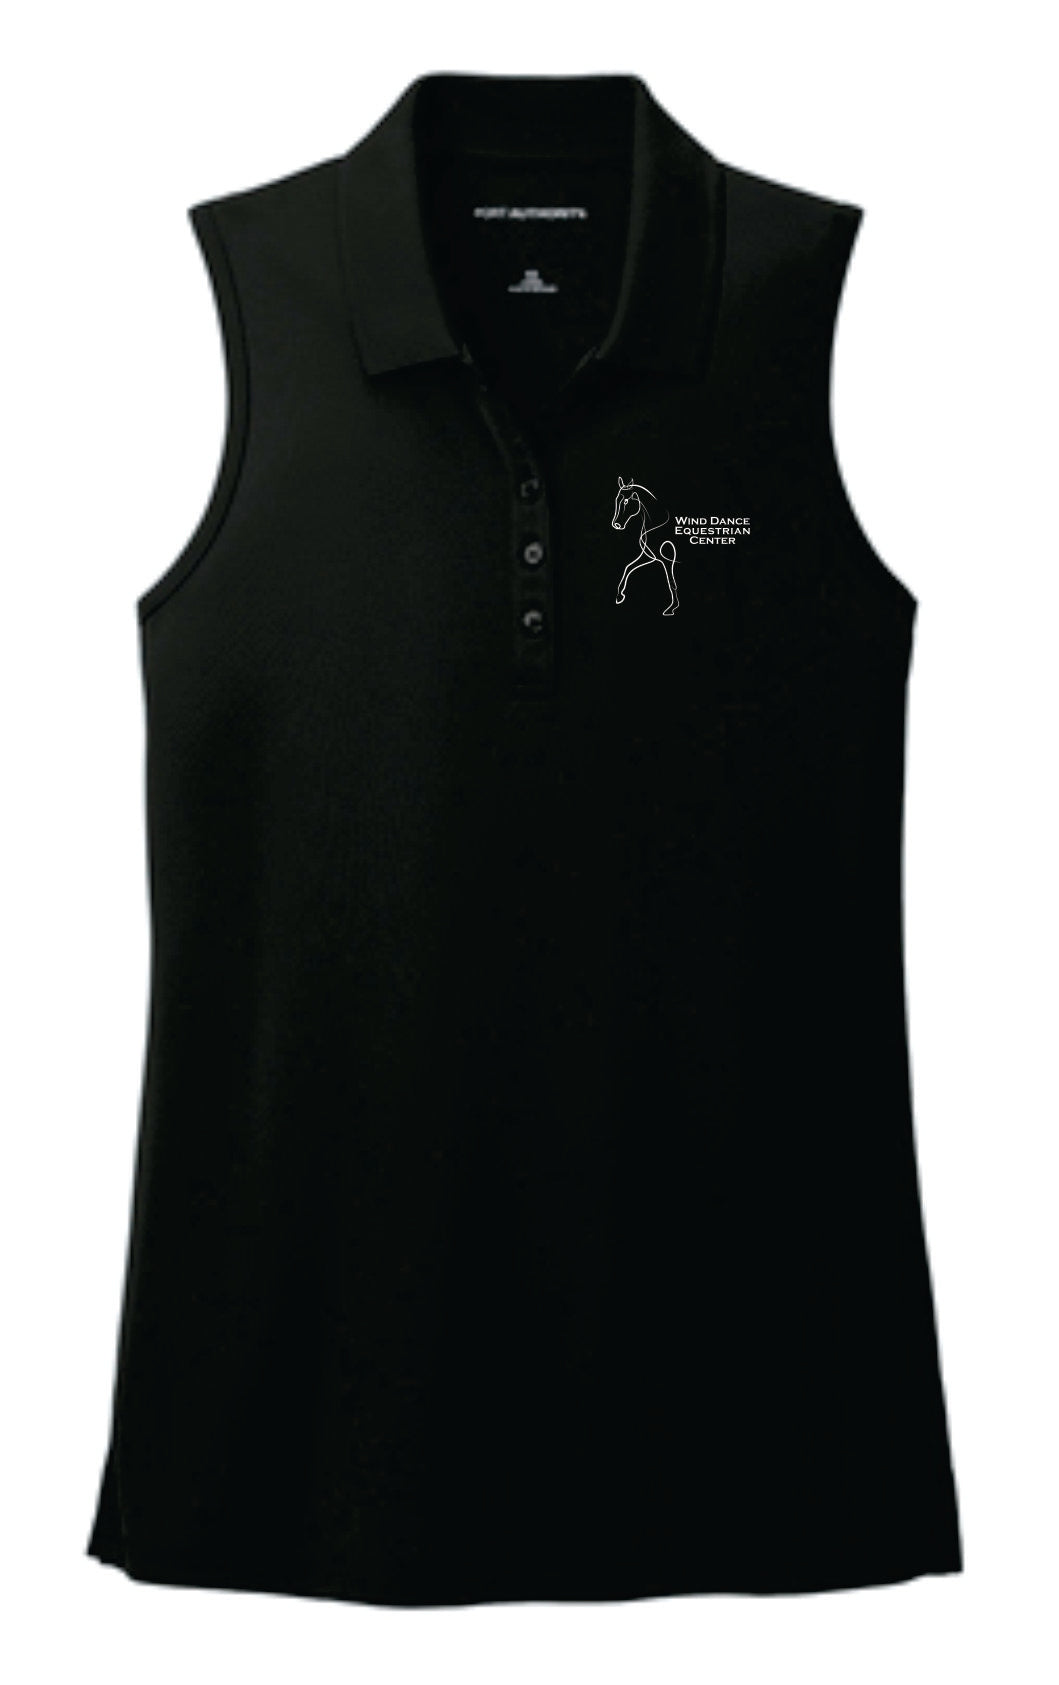 Wind Dance Equestrian Center Adult and Youth Embroidered Polos